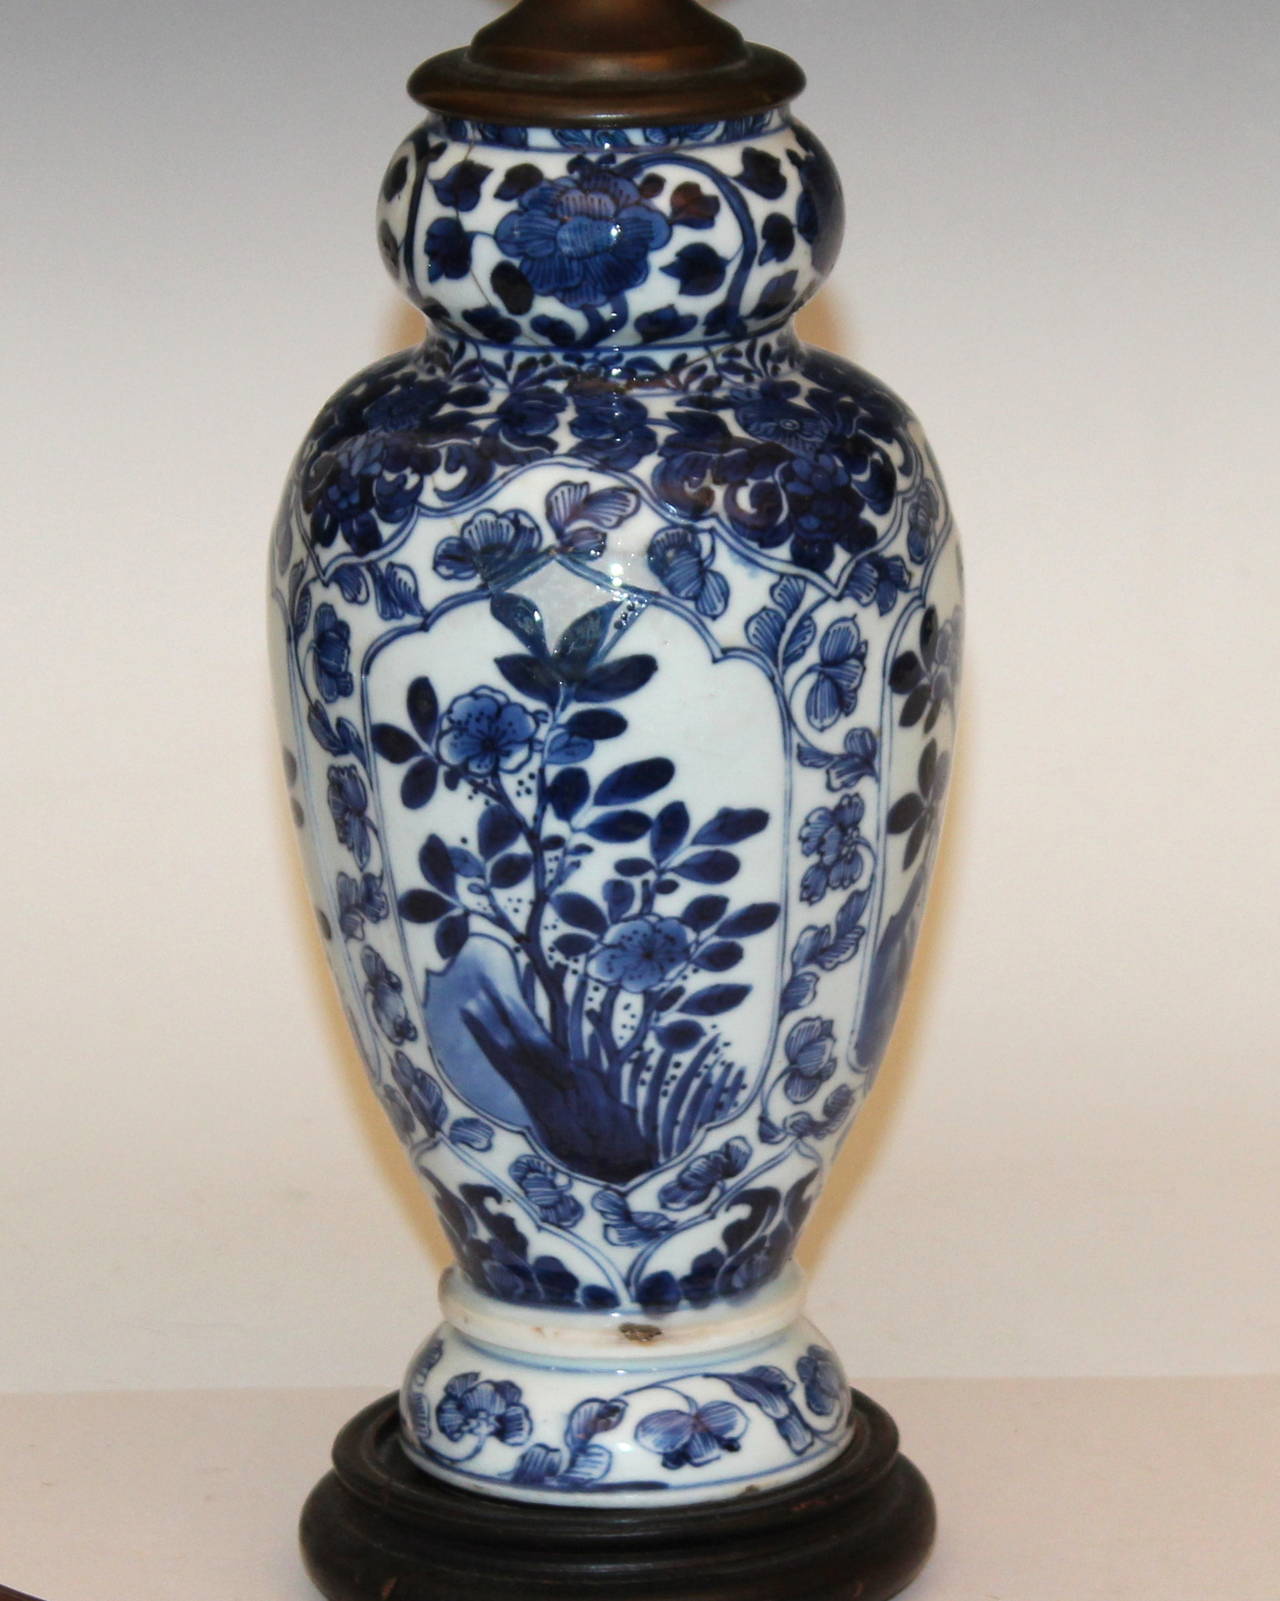 Nice antique Chinese blue and white porcelain, Kangxi period, garlic neck vase made into a lamp. Vase is 17th-18th century. Interesting form with good design of four panels of grasses, rocks and flowers surrounded by leaf and peony scrolls. Rich and